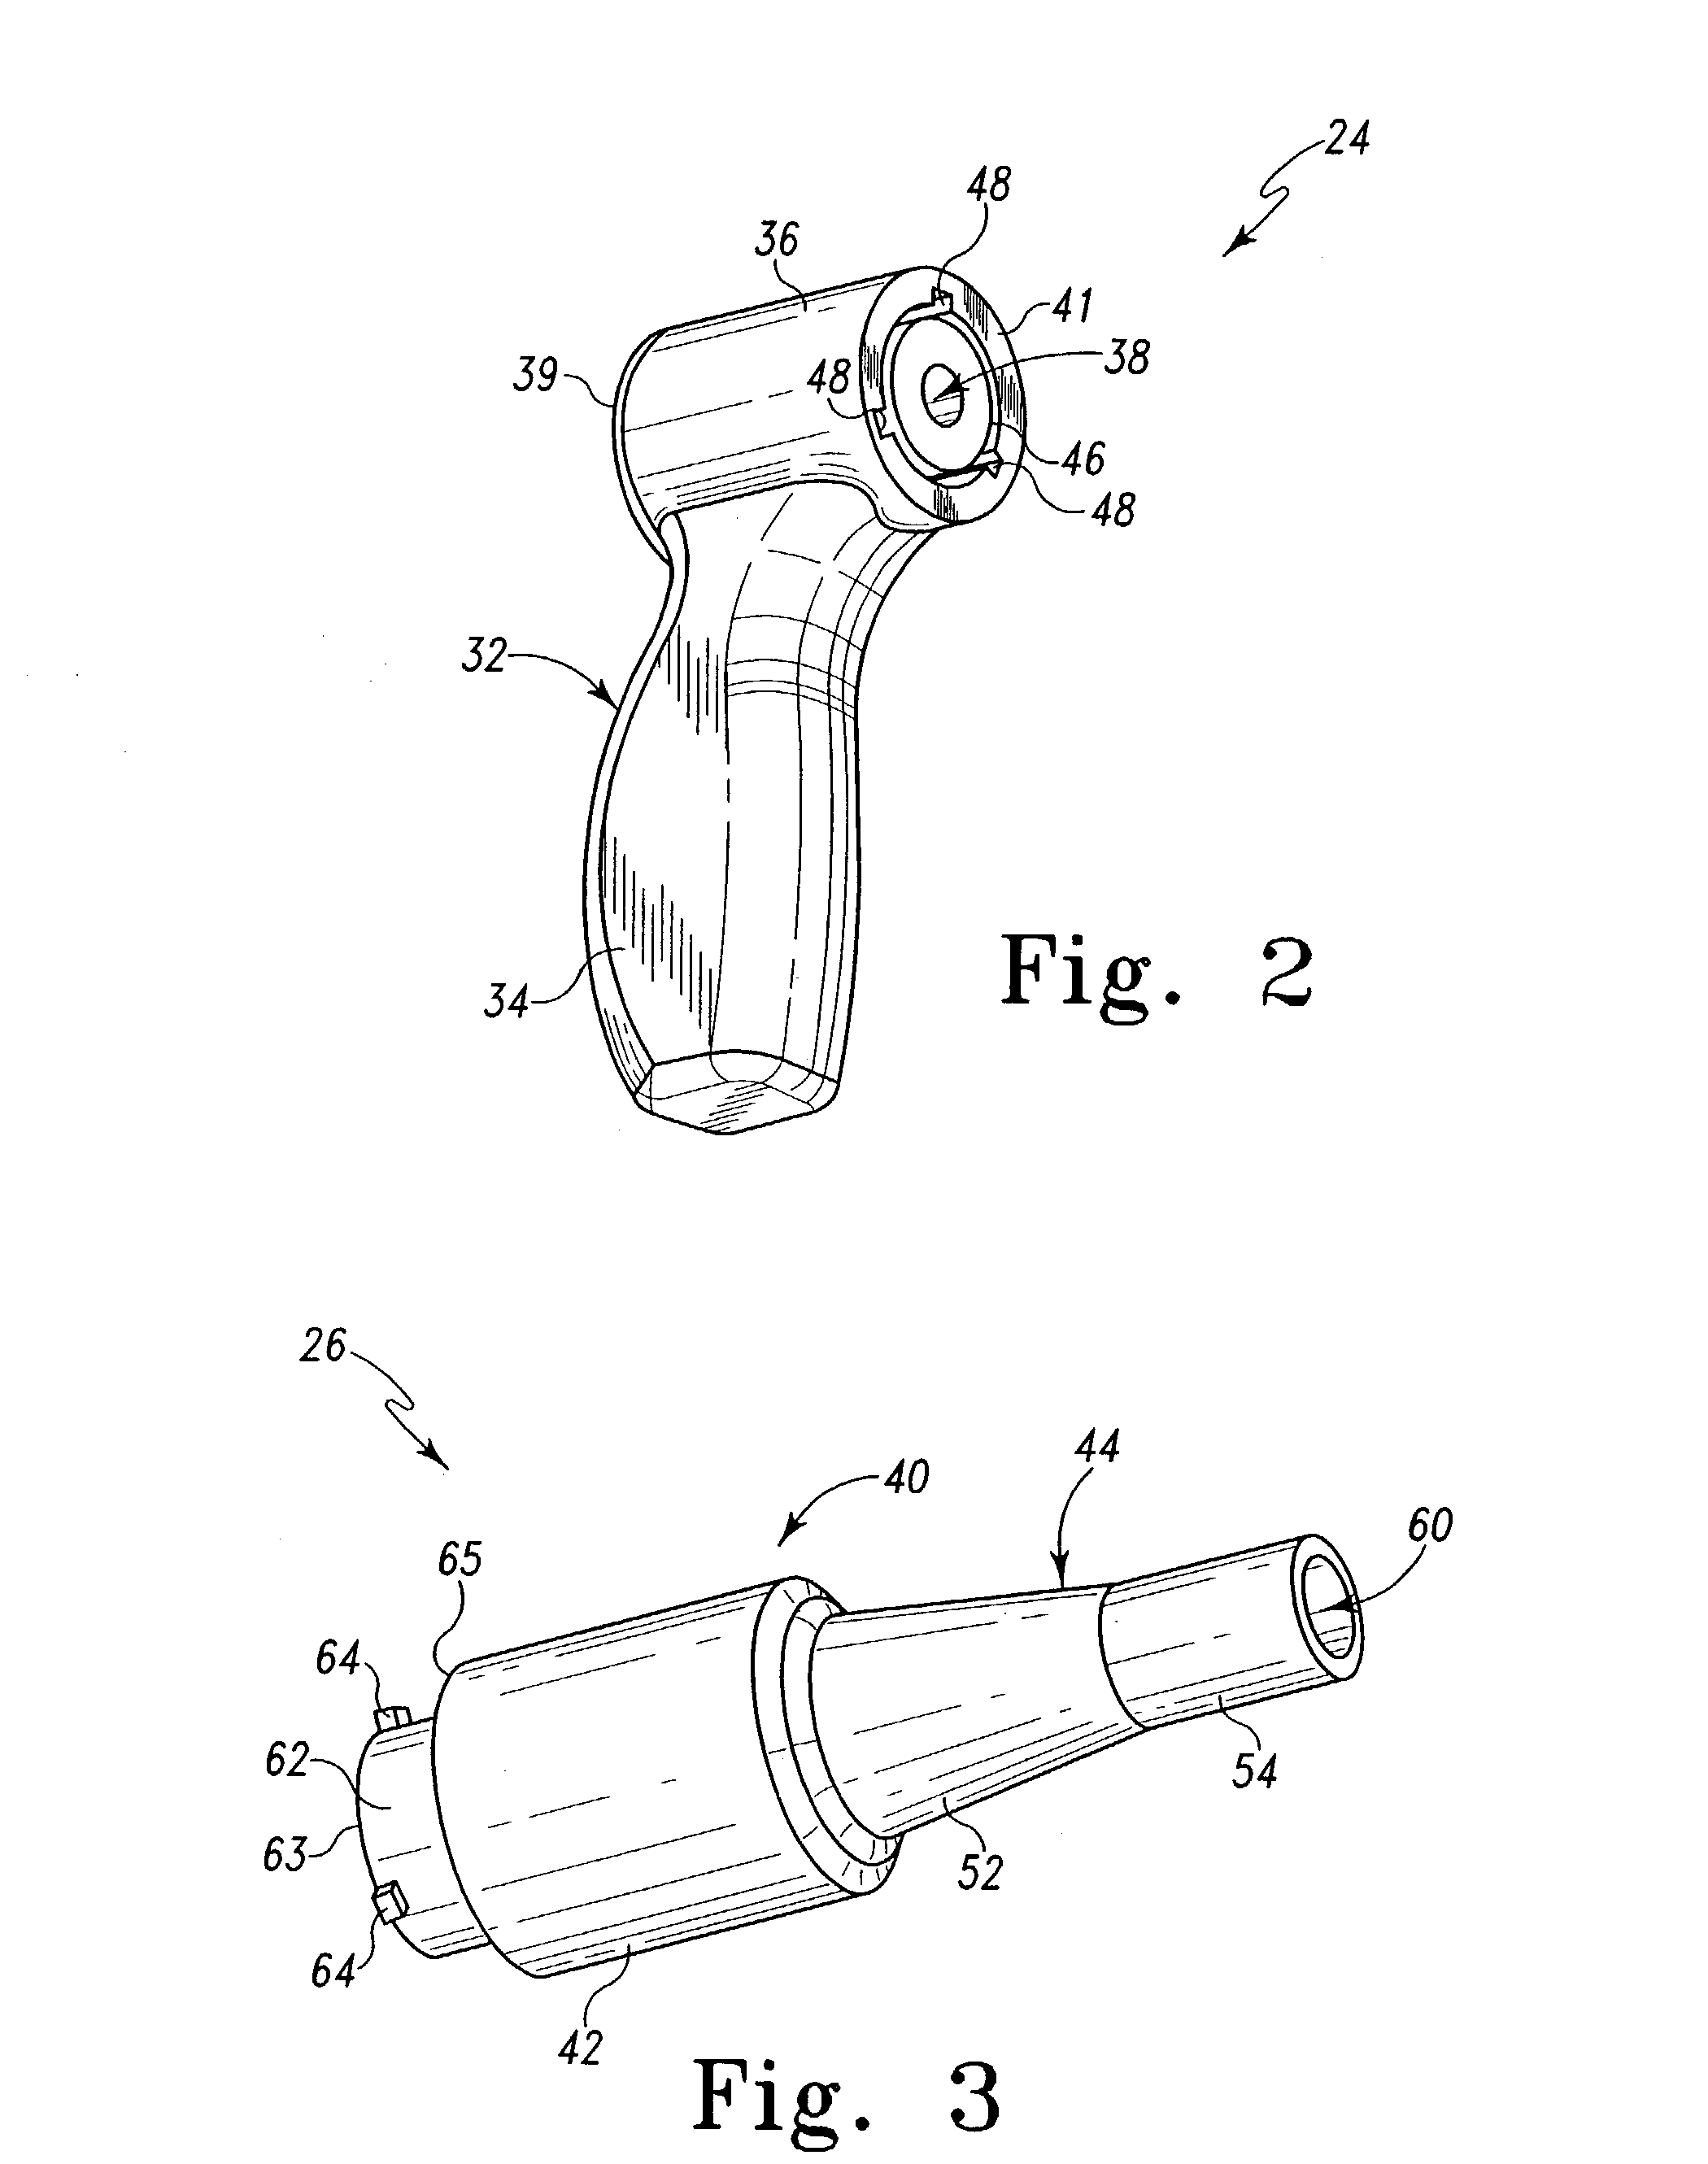 Bone graft delivery device and method of use